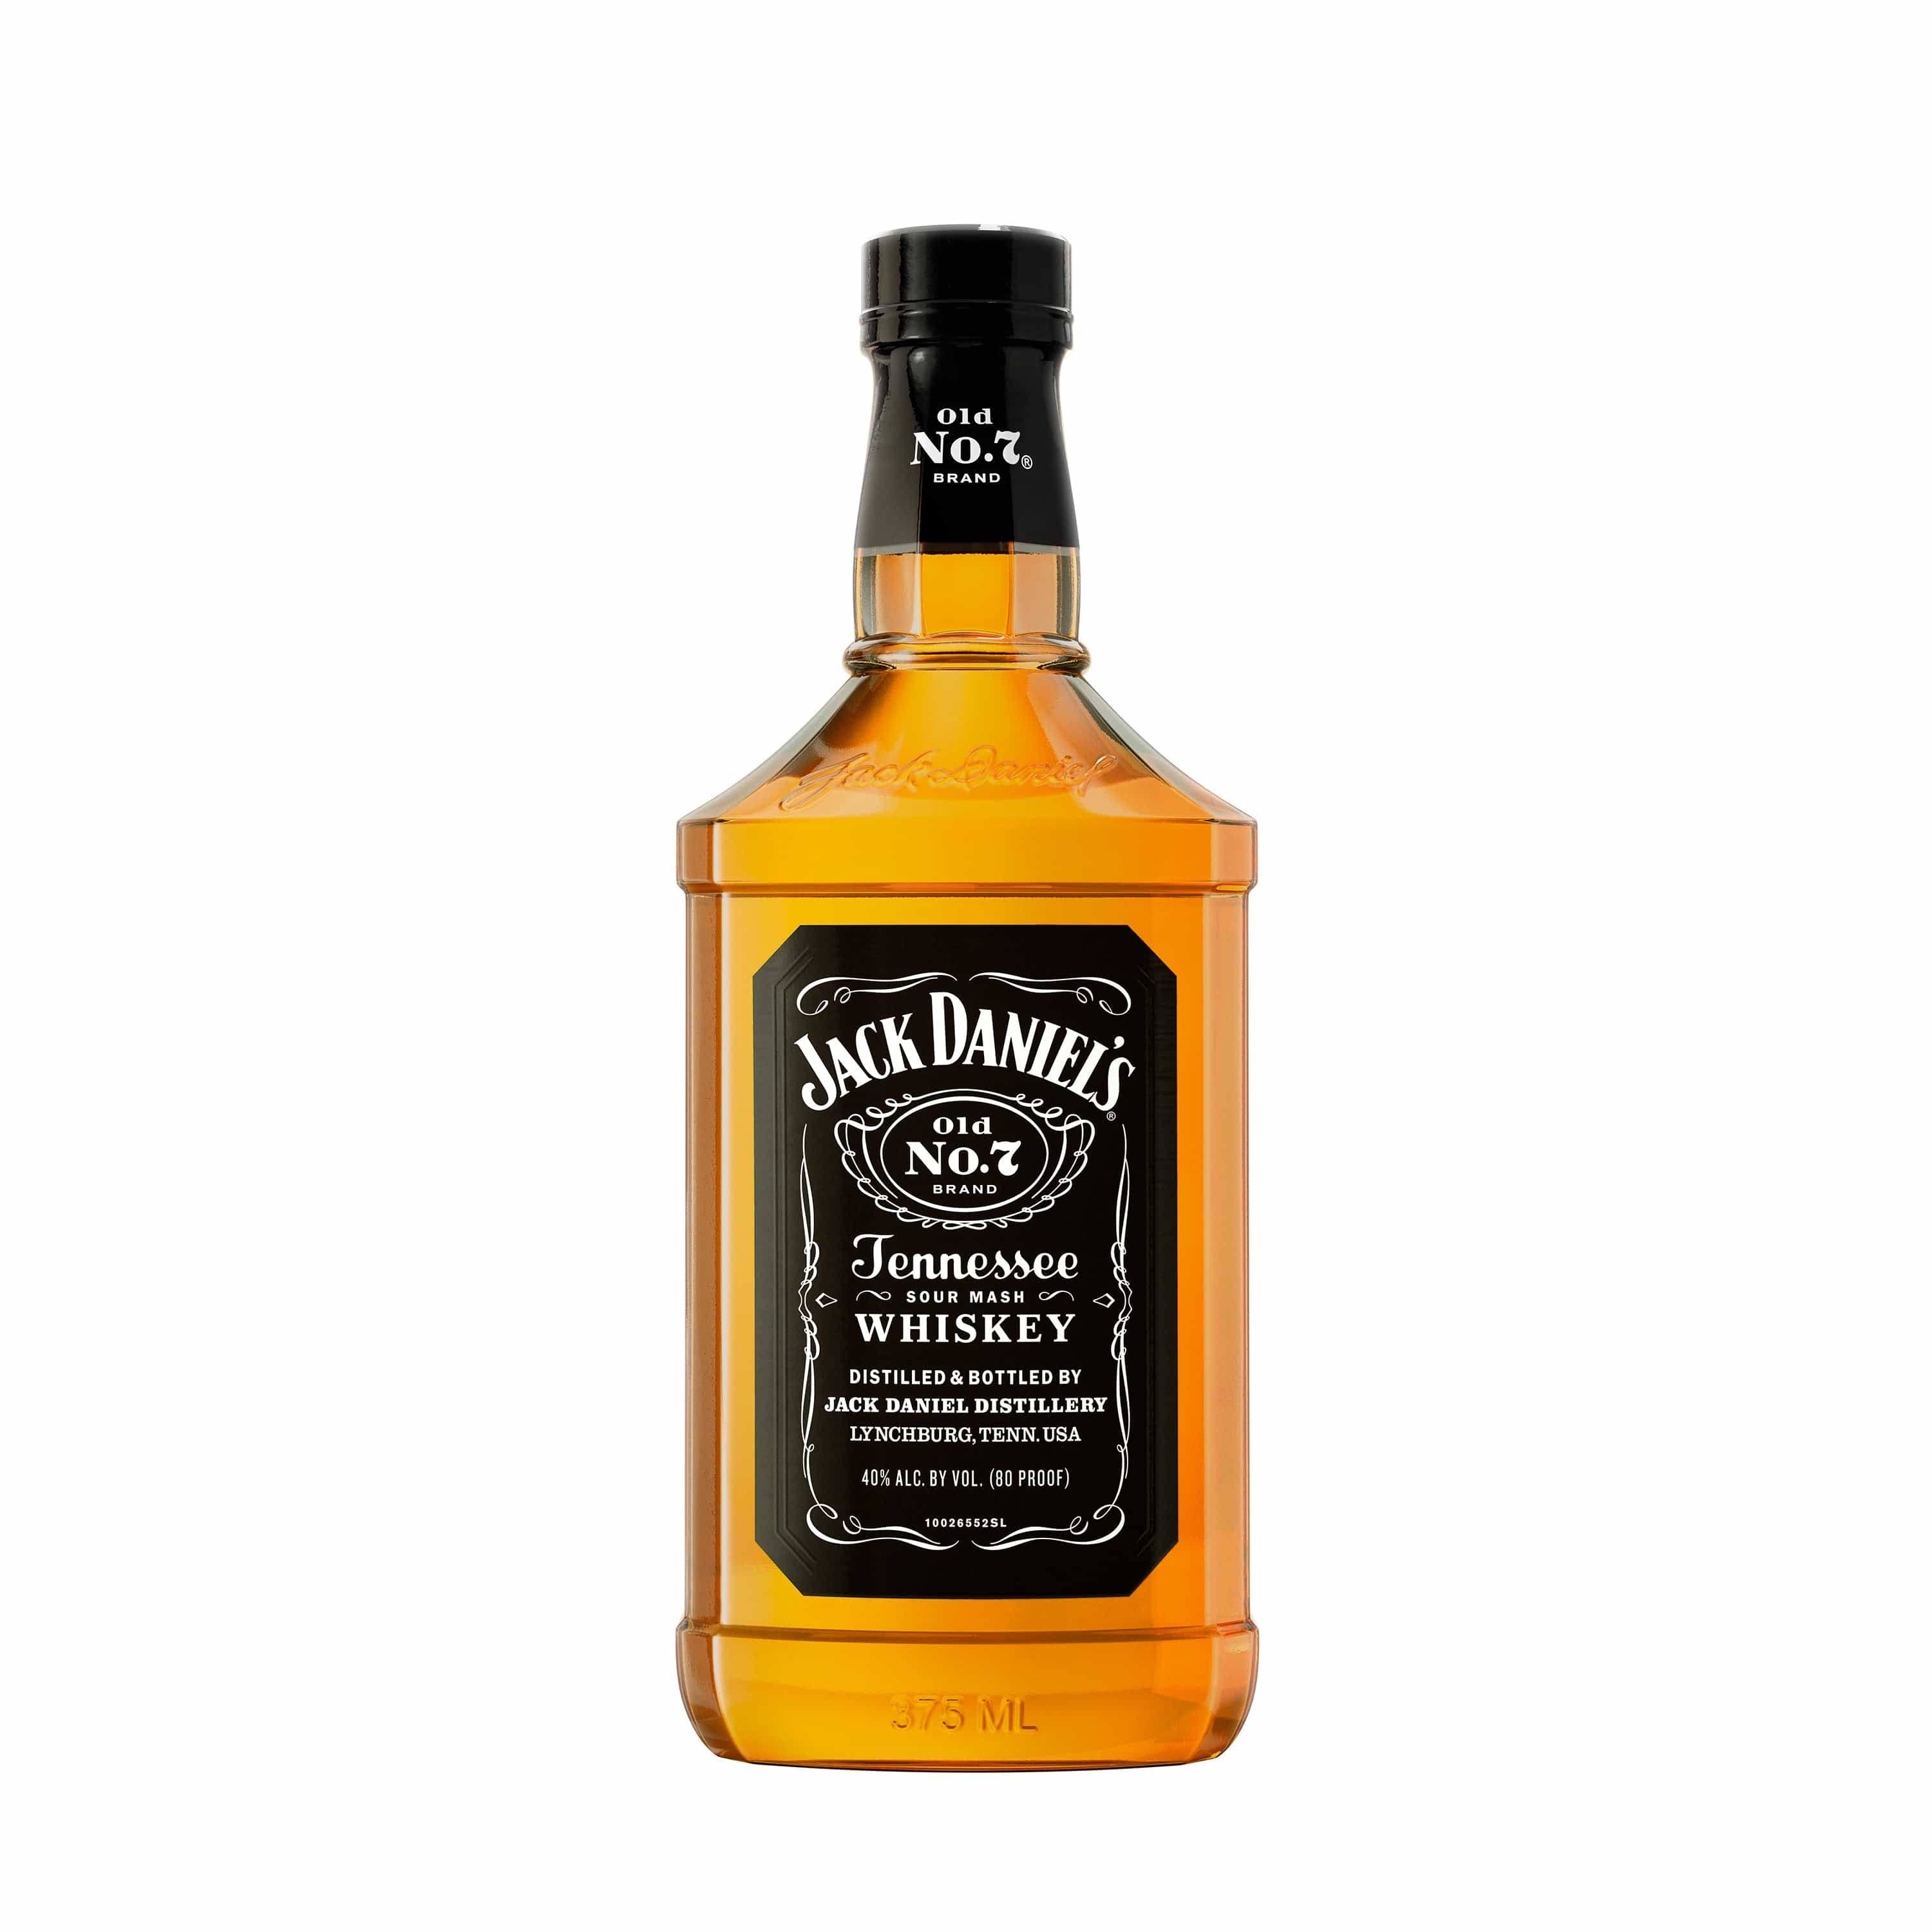 Jack Daniels Old No. 7 Whiskey, Tennessee Whiskey - 375 ml